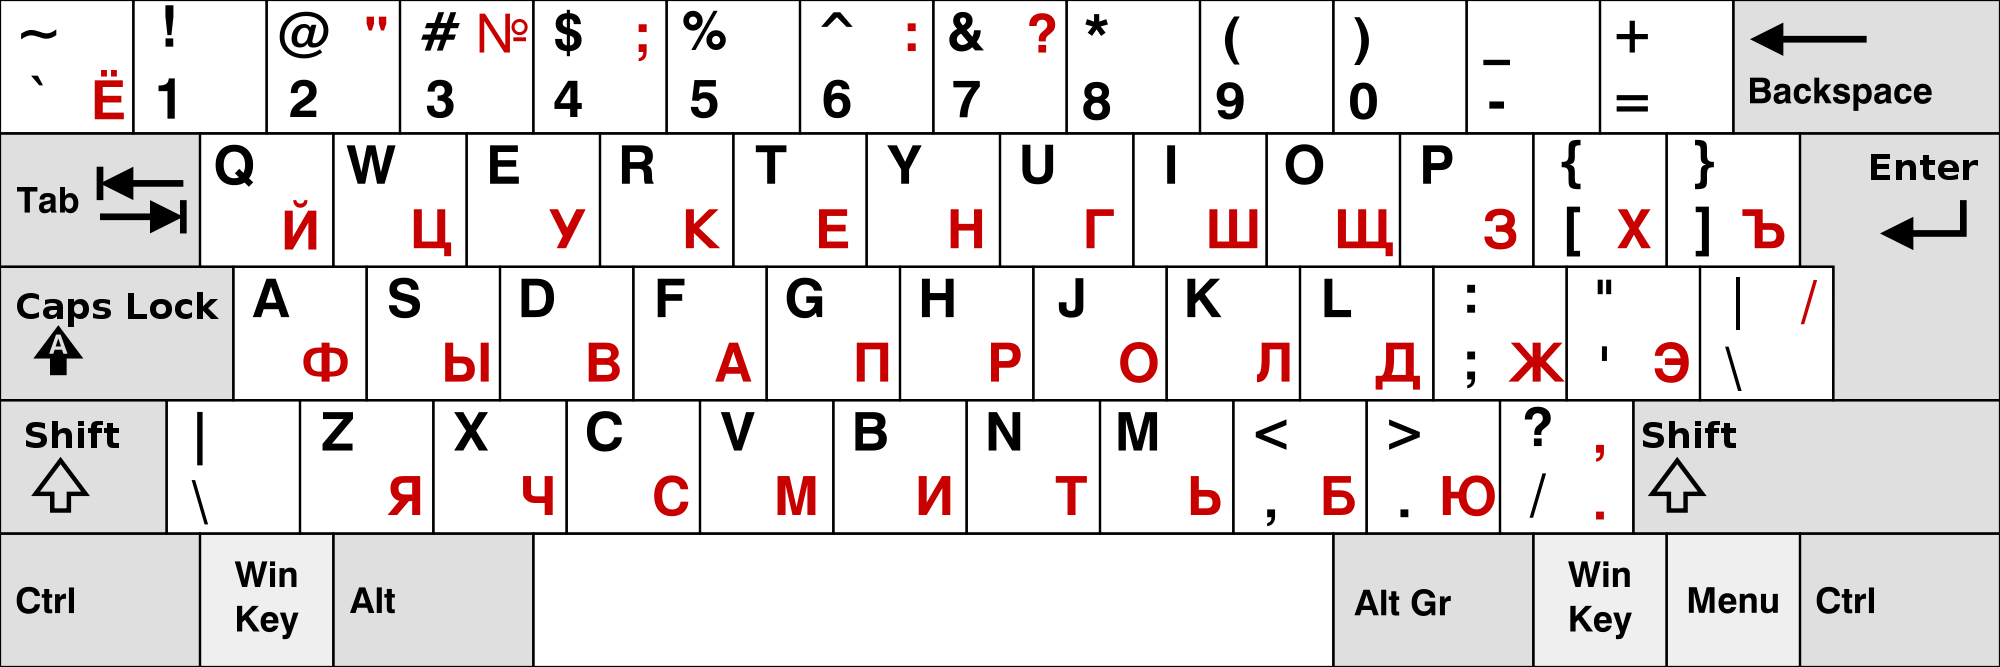 How To Install The Cyrillic Keyboard On Your Computer Or Phone 